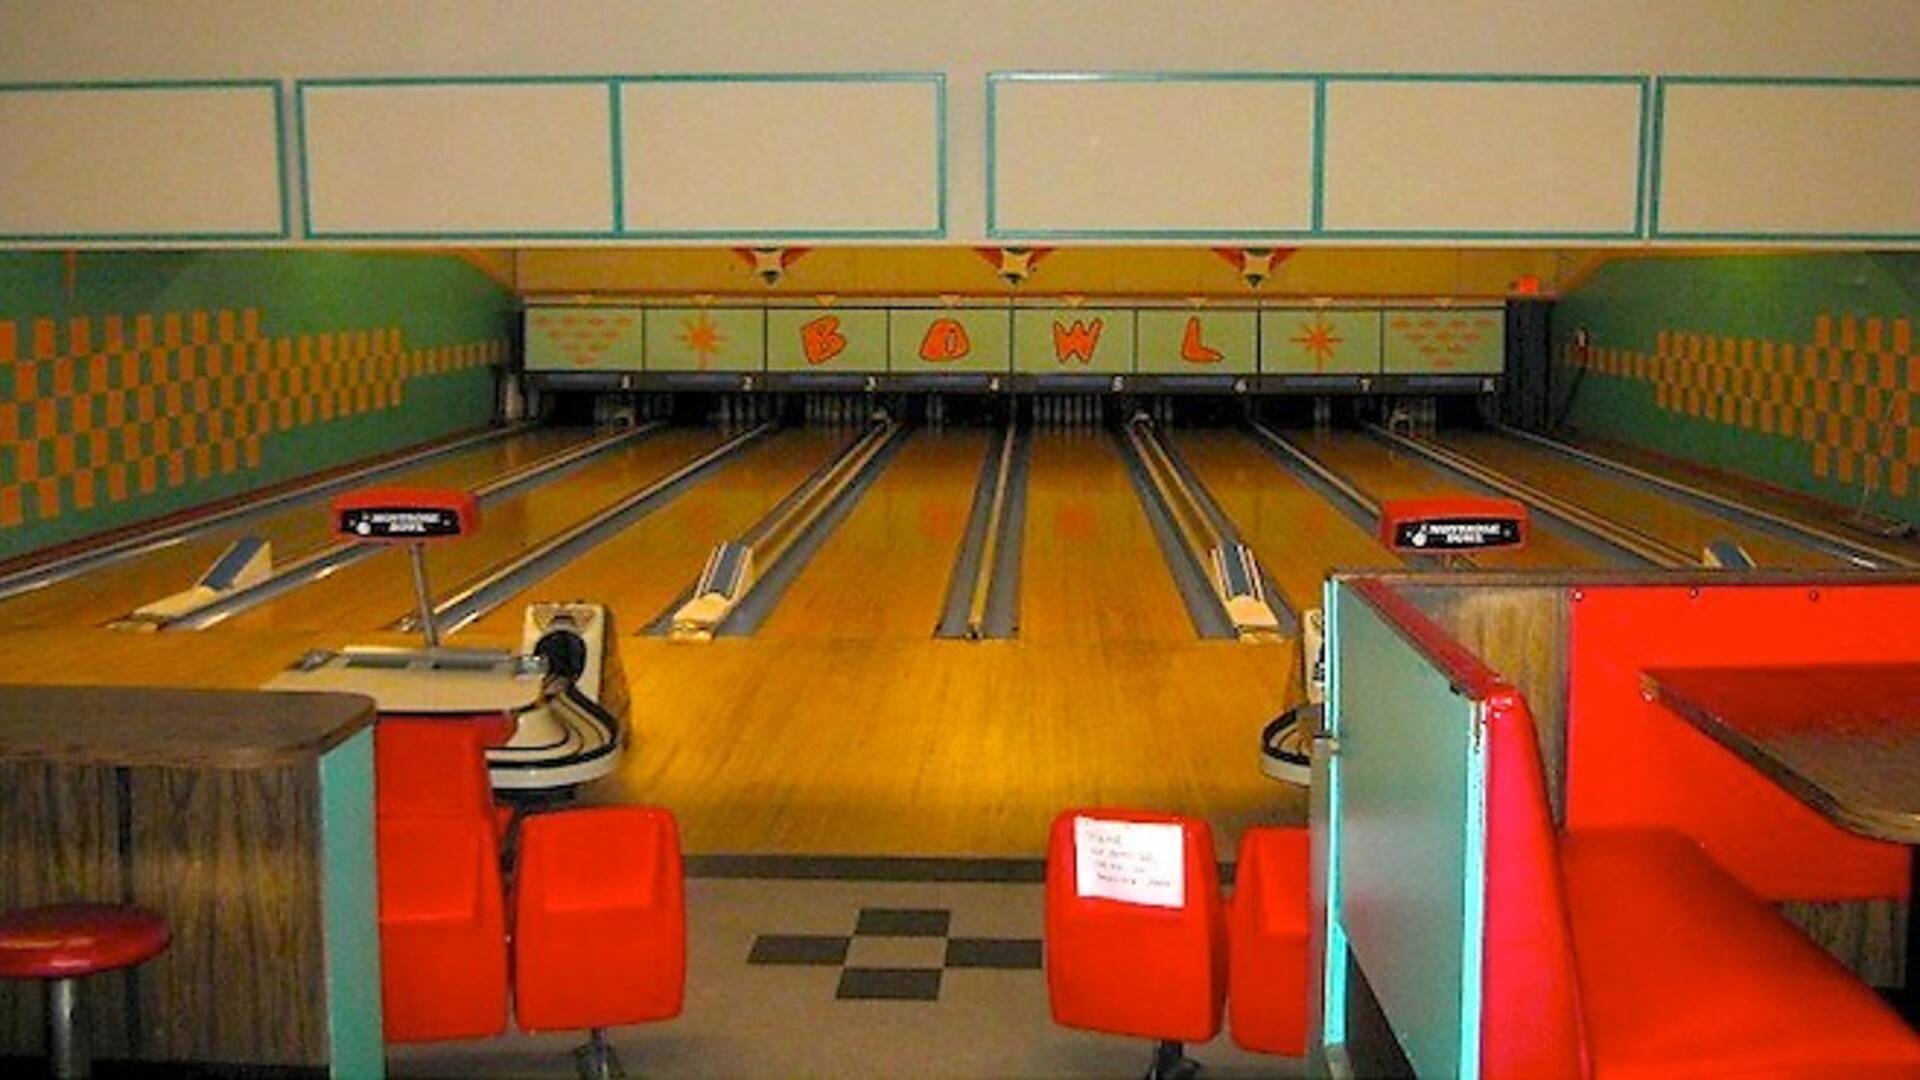 Montrose Bowl Things to do in Glendale, Los Angeles